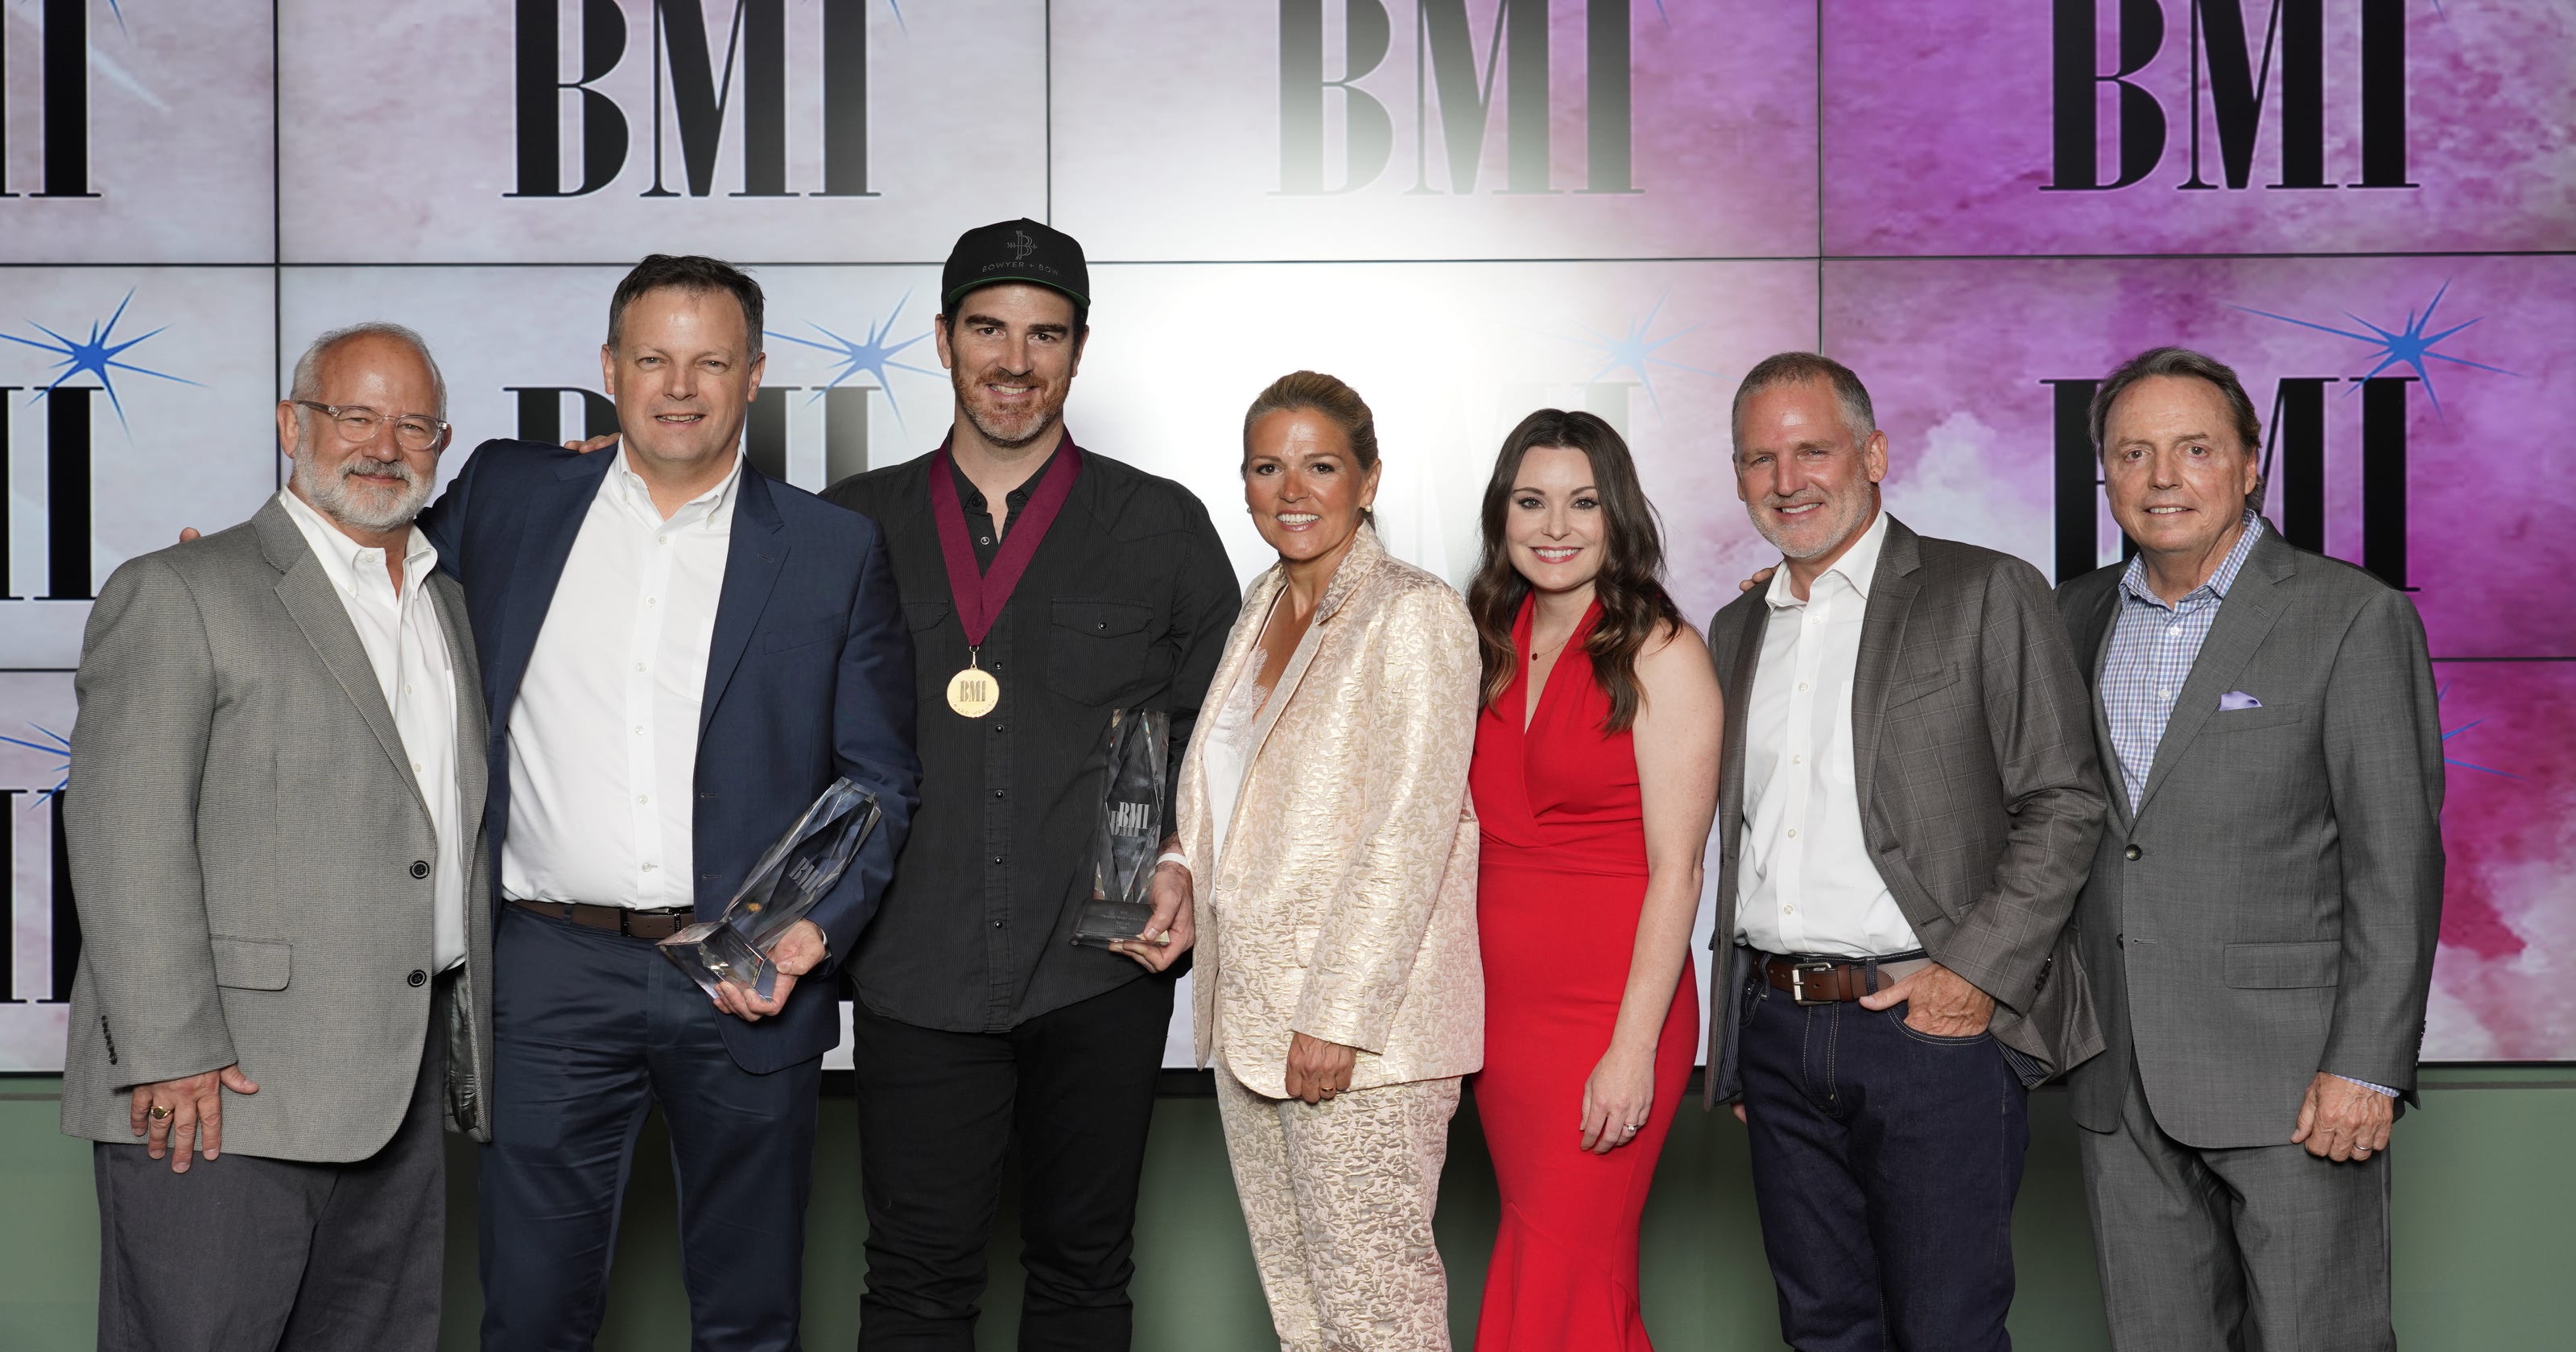 Ed Cash among those honored at BMI Christian Awards in Nashville